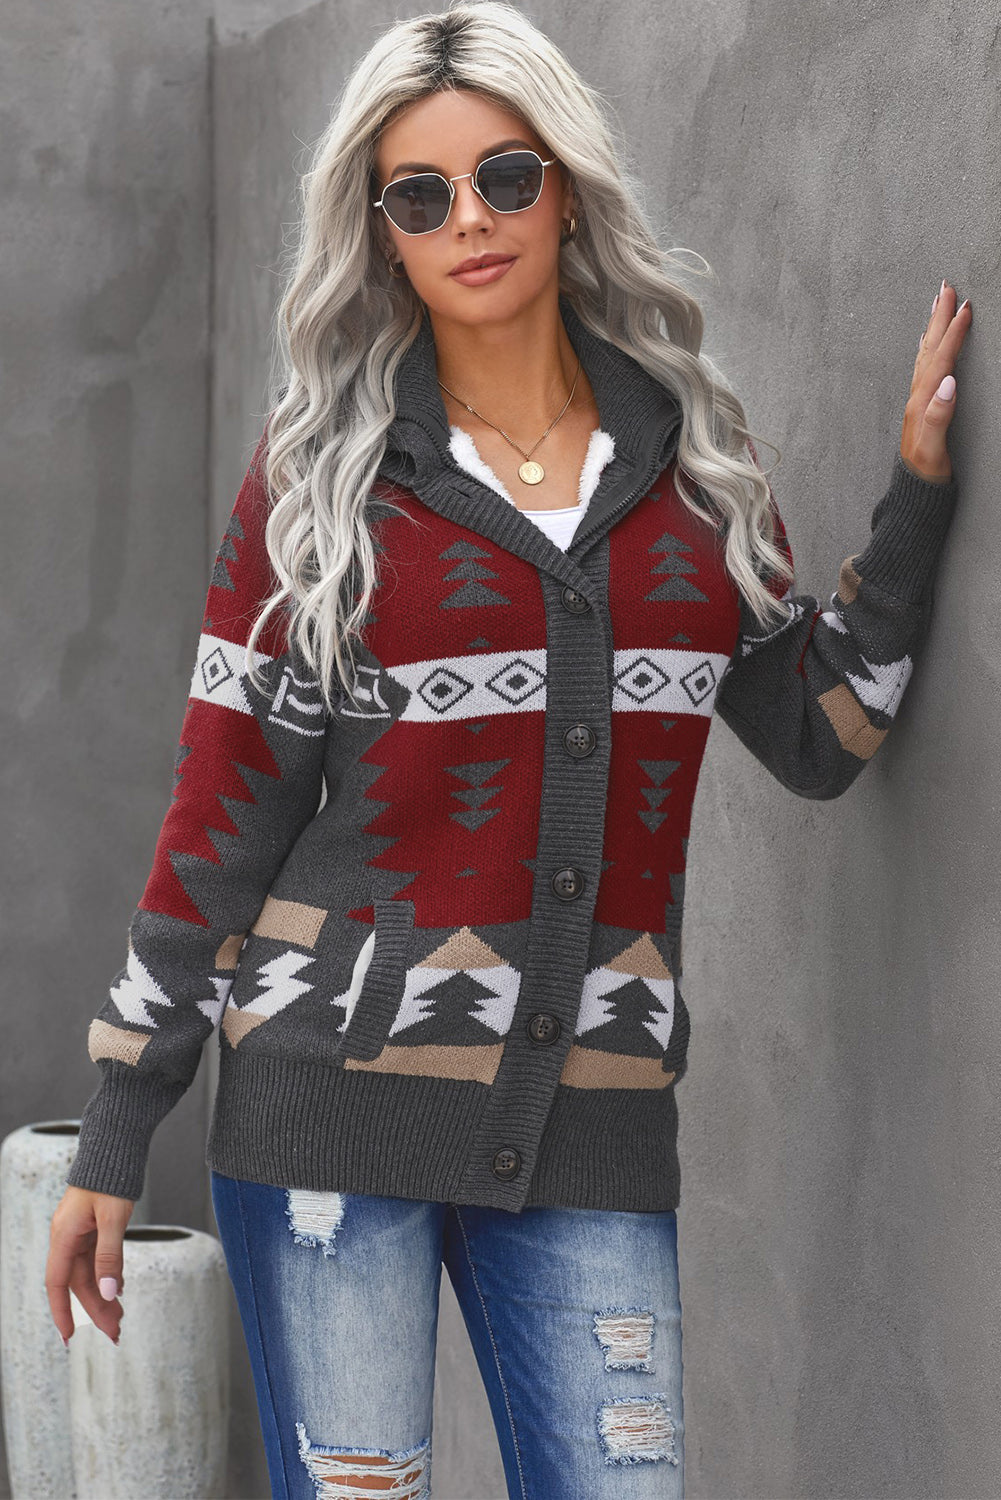 Women Jacquard Knit Cardigans Buttoned Front Hooded Sweater